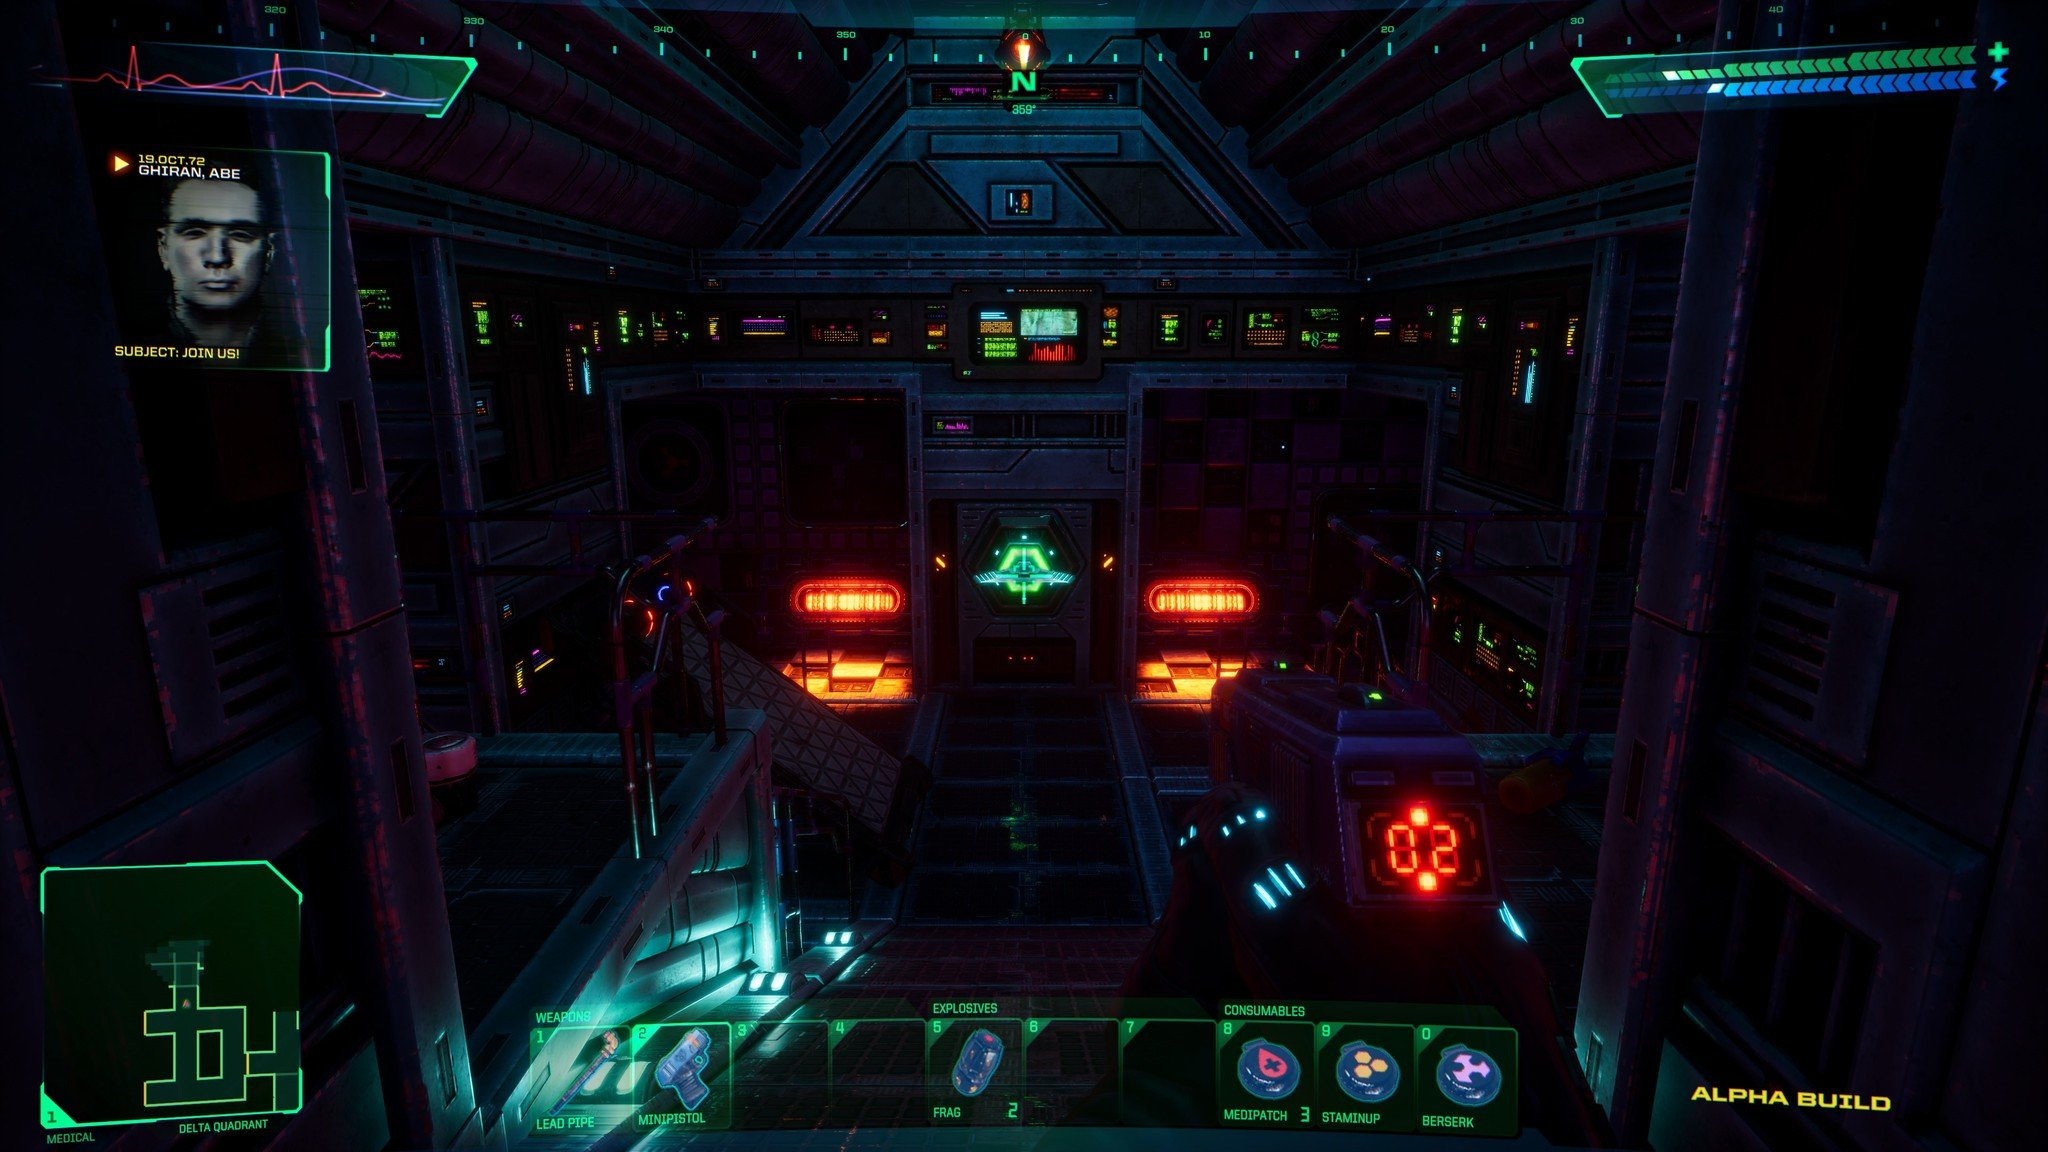 2048x1152 Nightdive Studios on what to expect from 'largely complete' System Shock remake | Windows Central